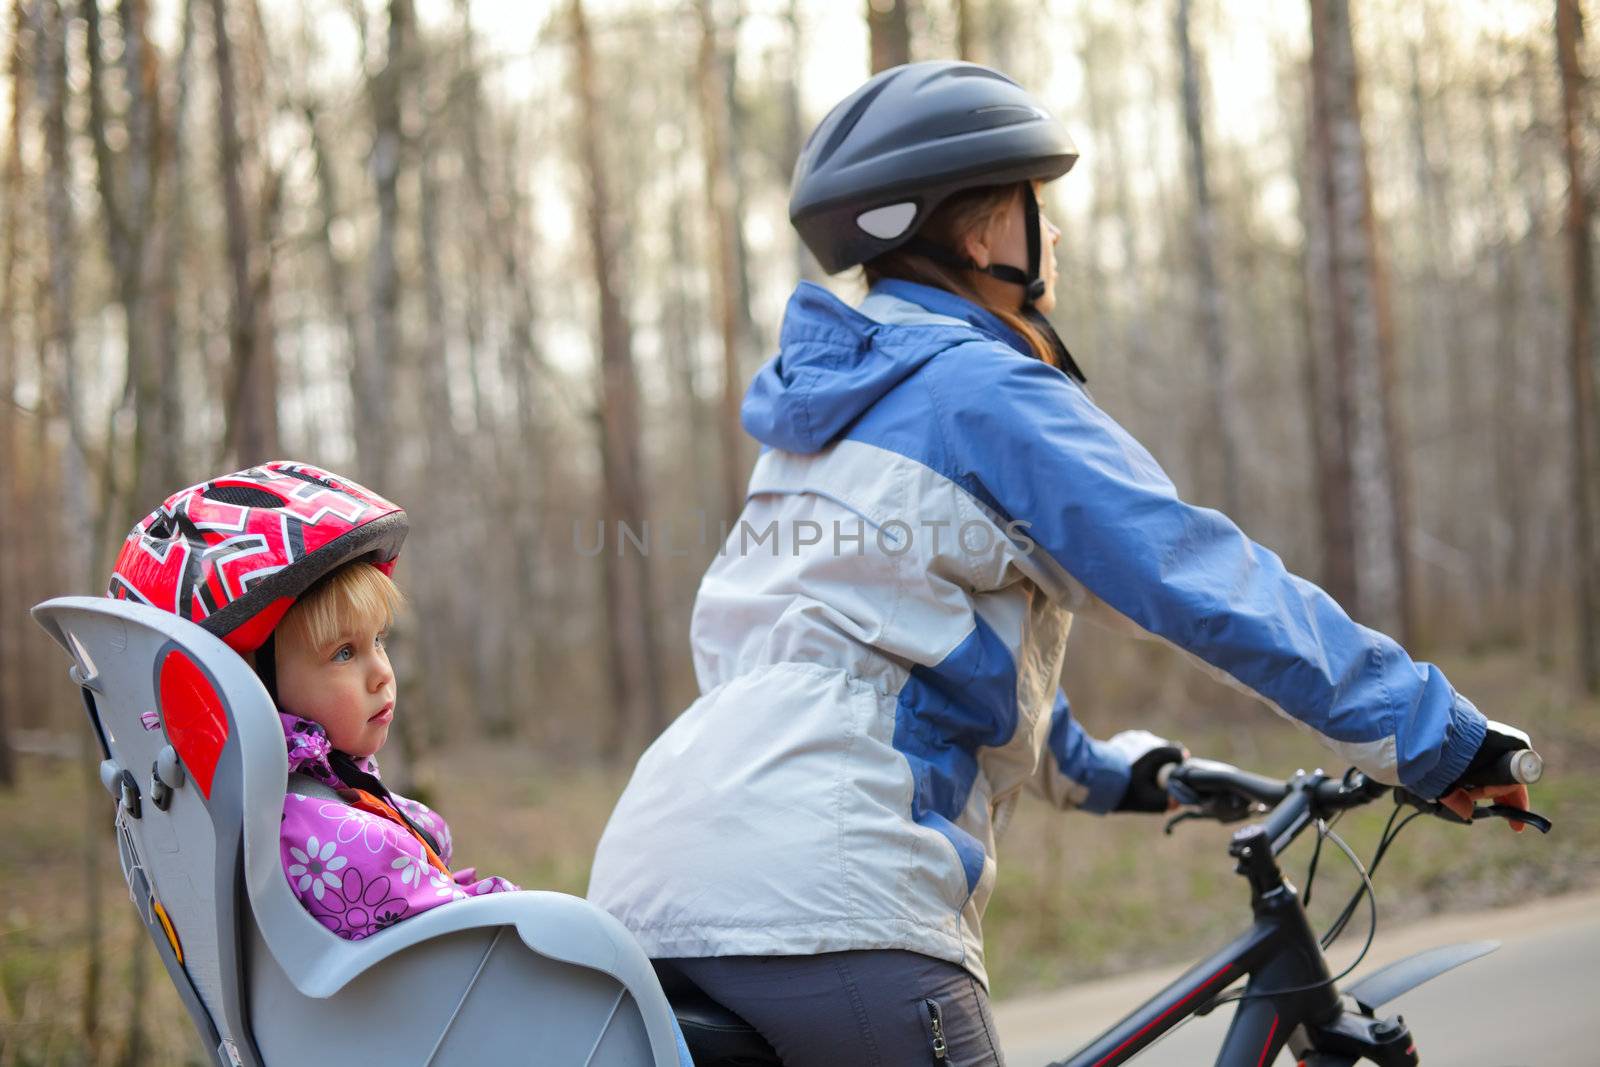 Mother riding on a bicycle with little girl, focus on child